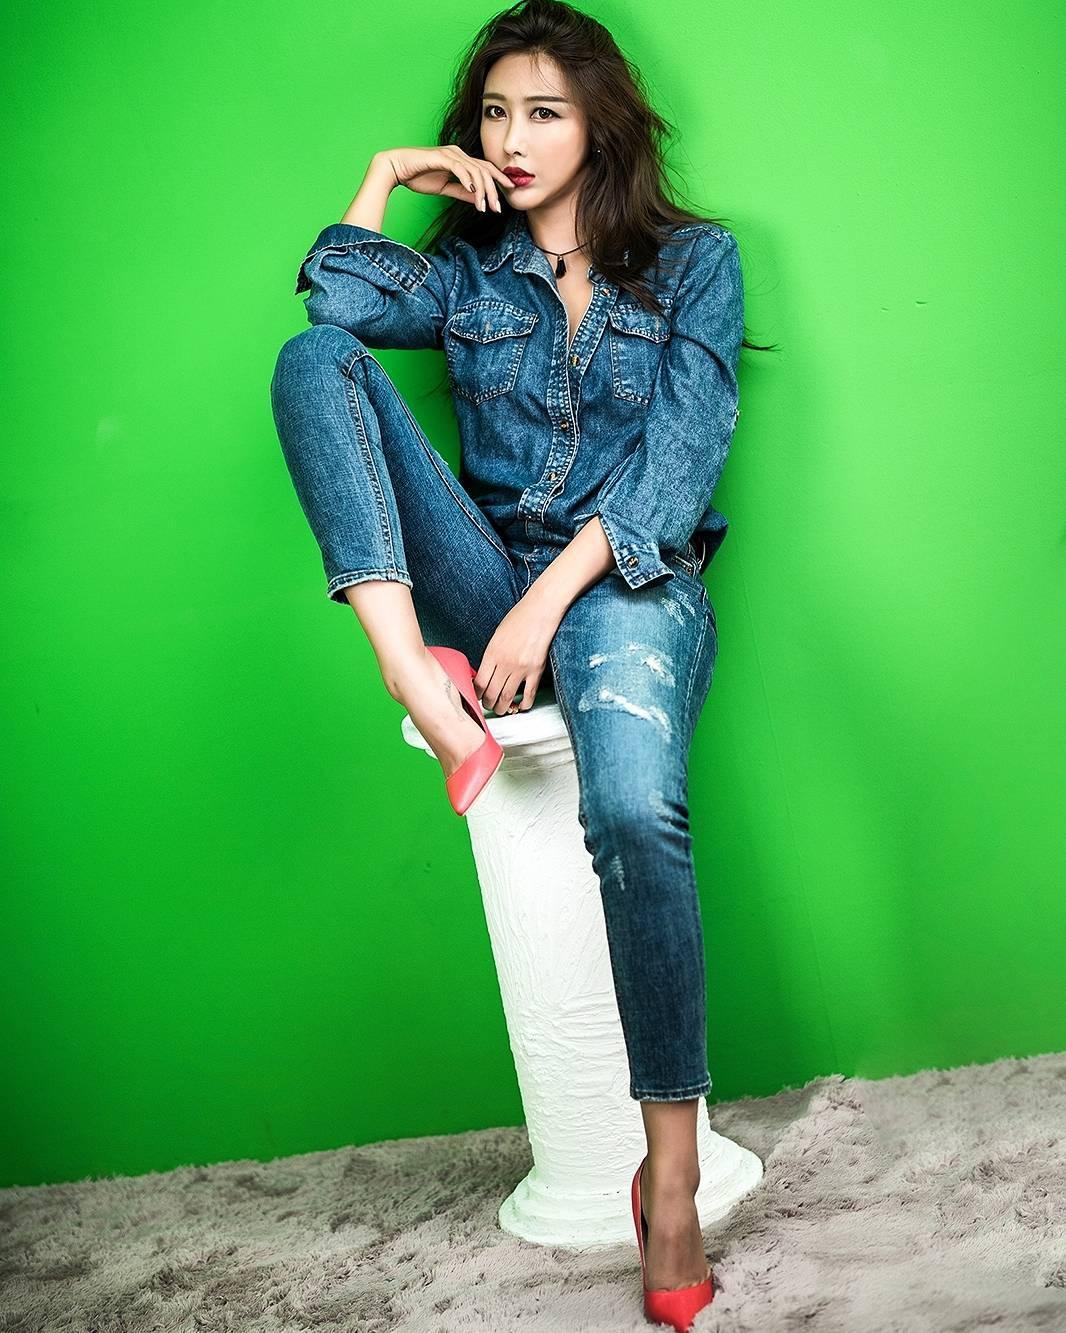 Jang In Young Beautiful Legs Picture and Photo